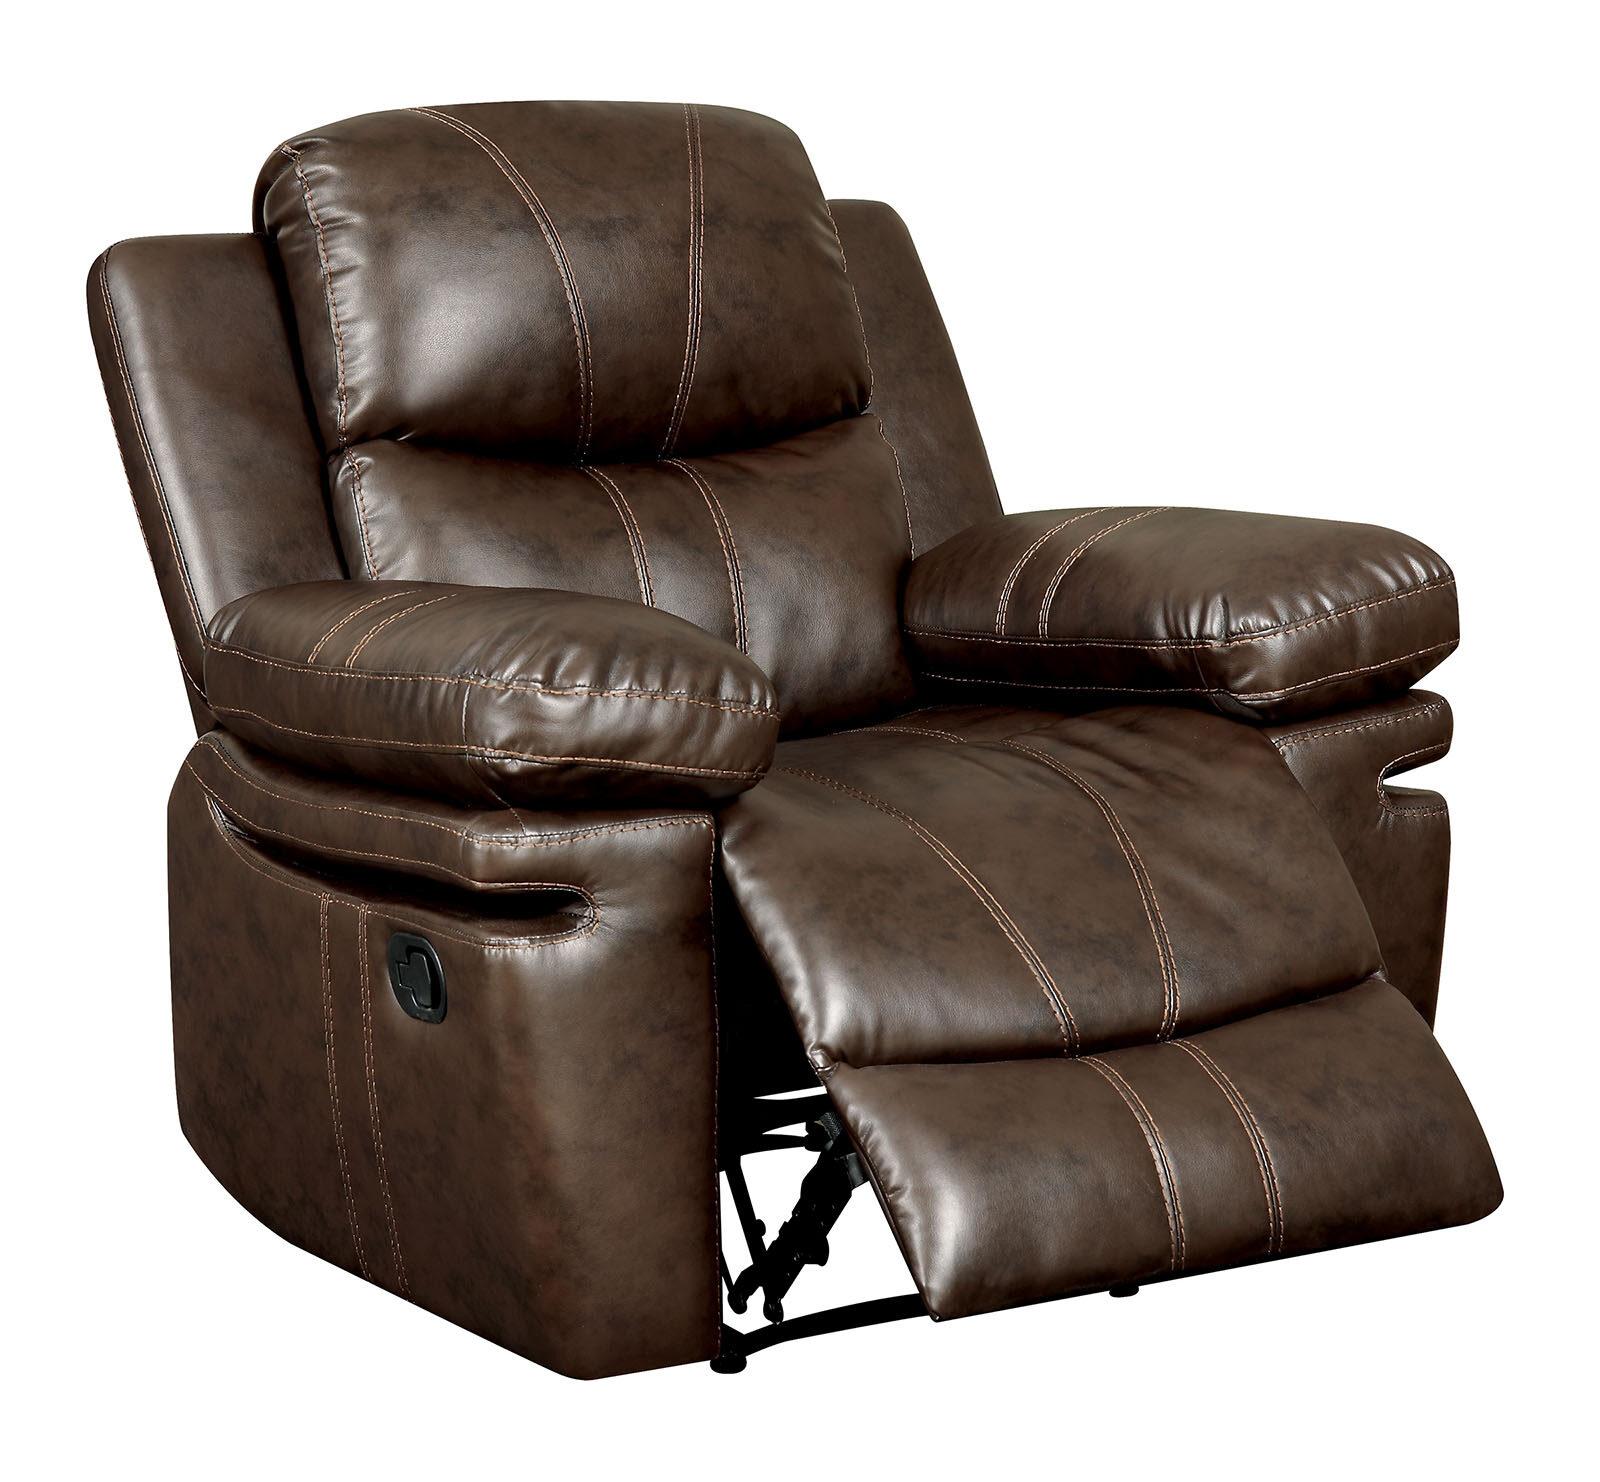 Transitional Recliner Chair CM6992-CH Listowel CM6992-CH in Brown Bonded Leather